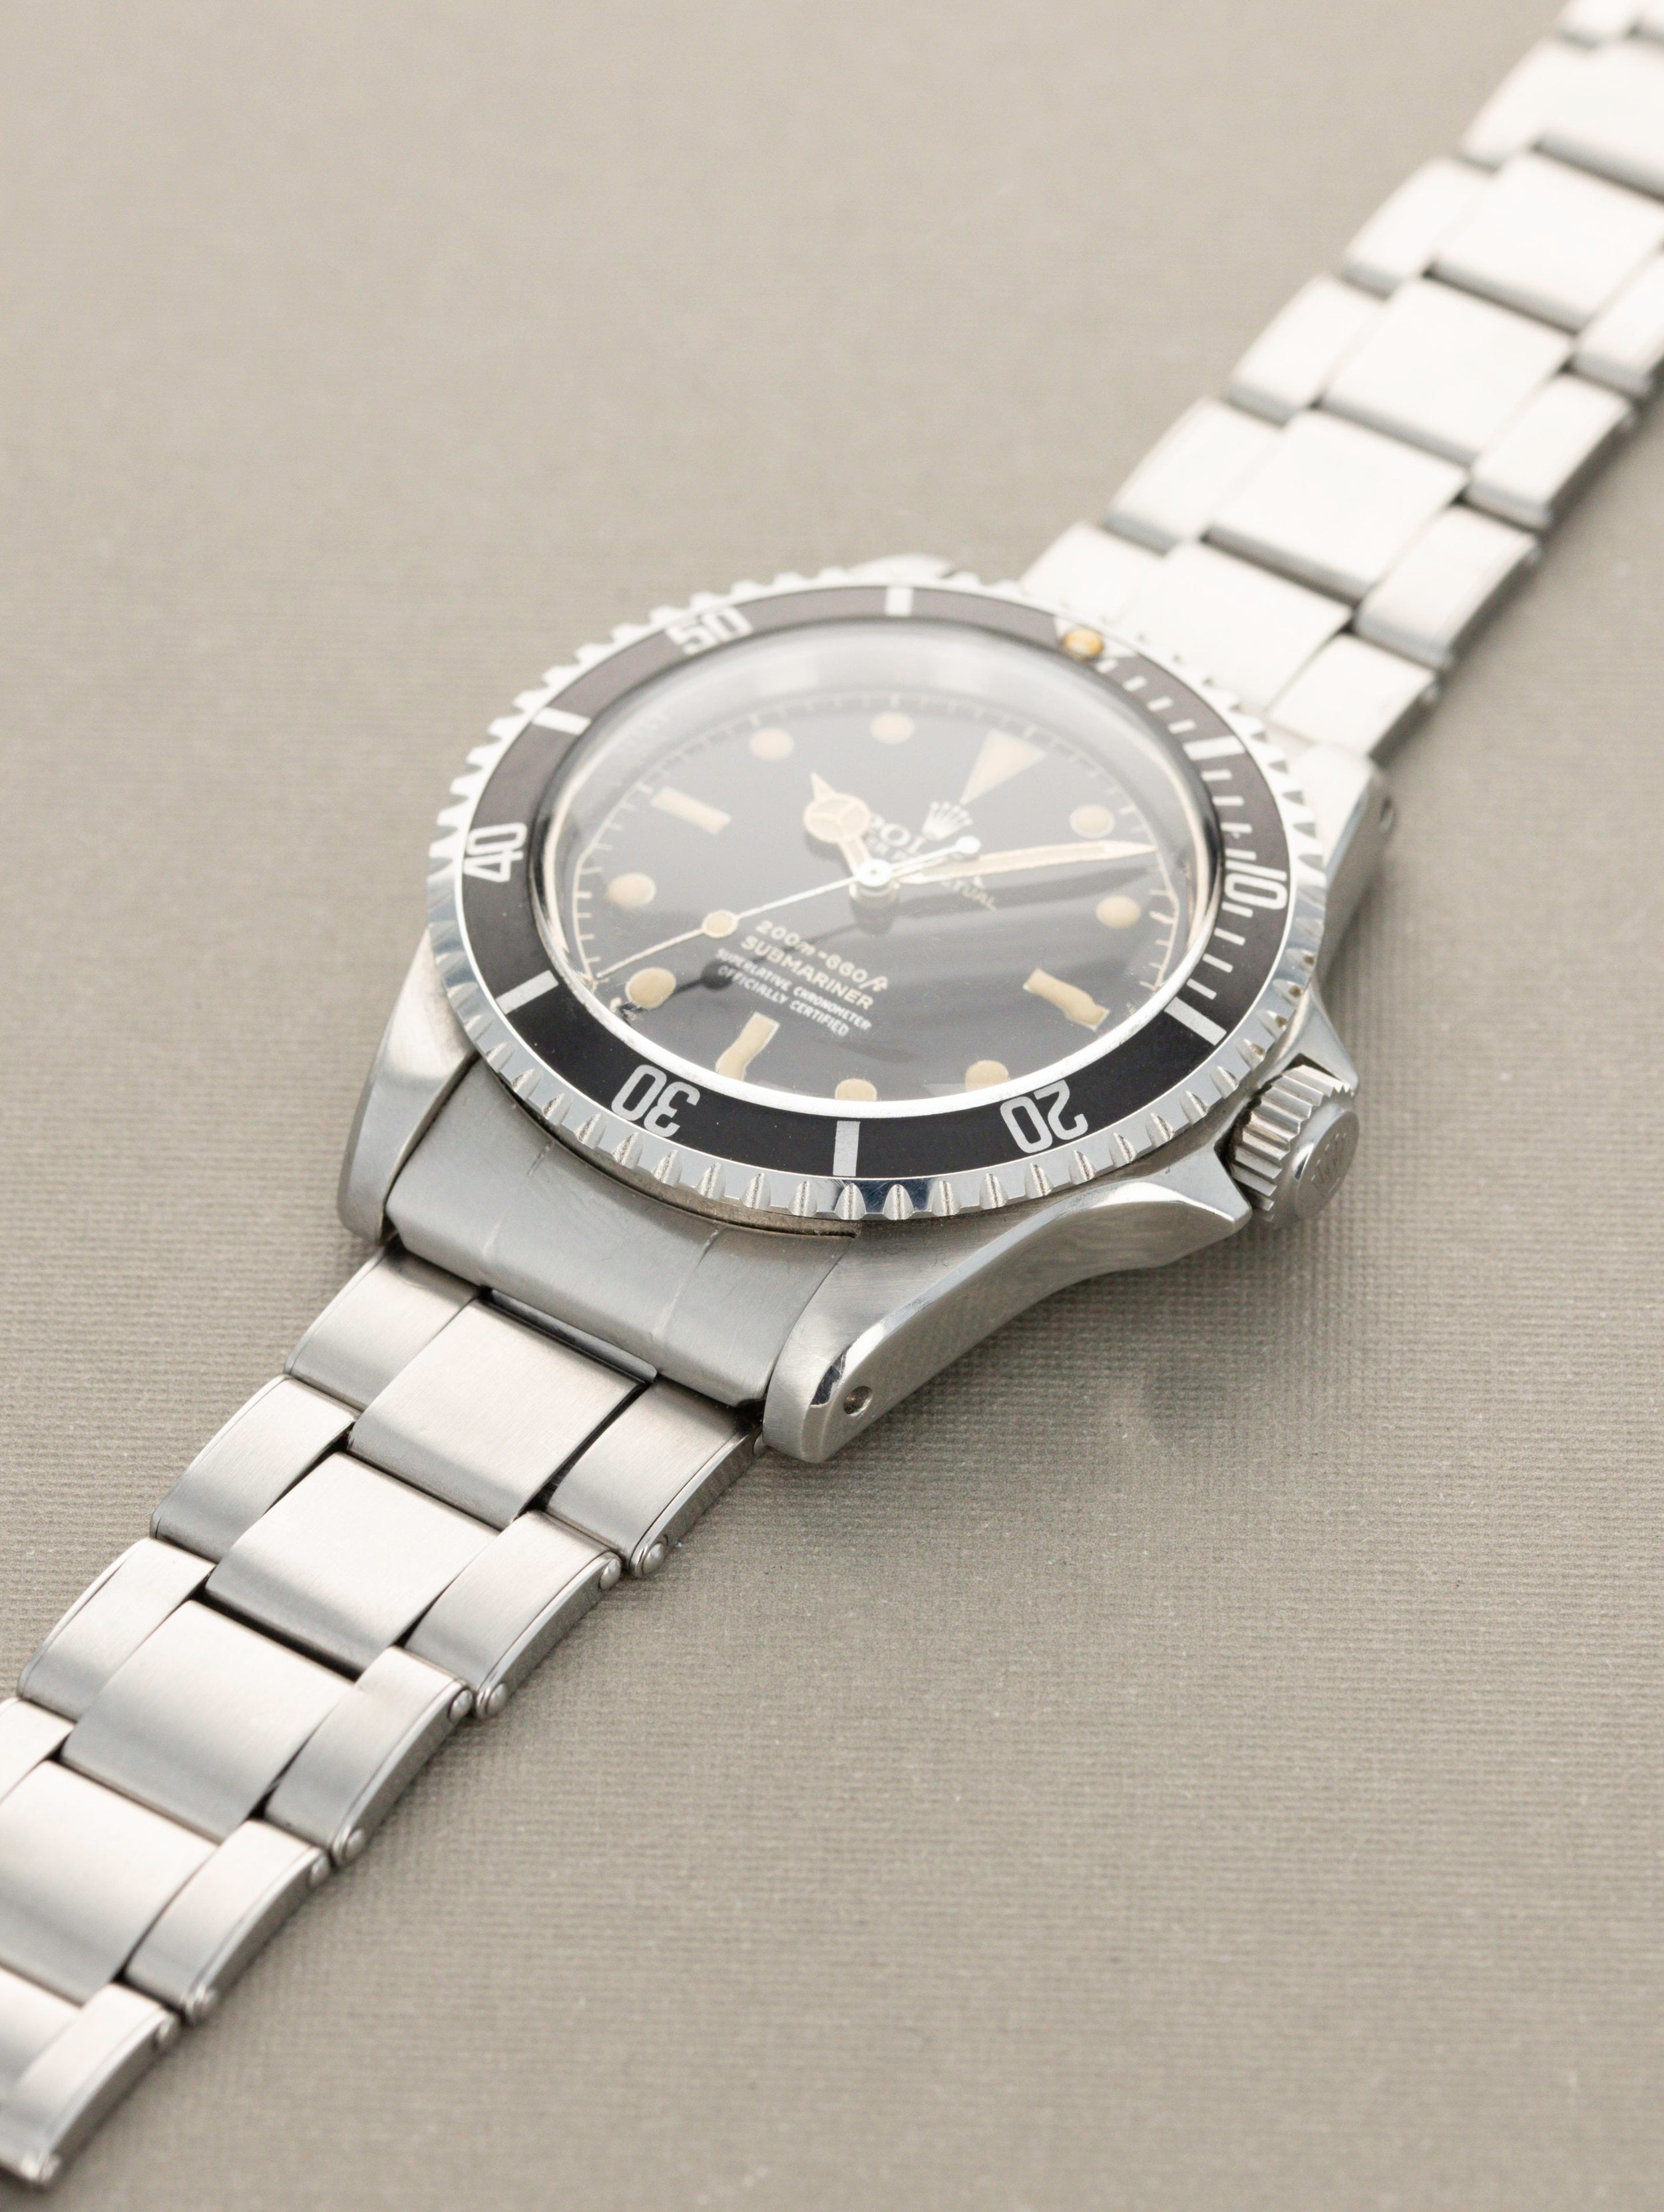 Rolex Submariner Ref. 5512 - 'Gilt 4-Line Chapter Ring PCG Exclamation Point'